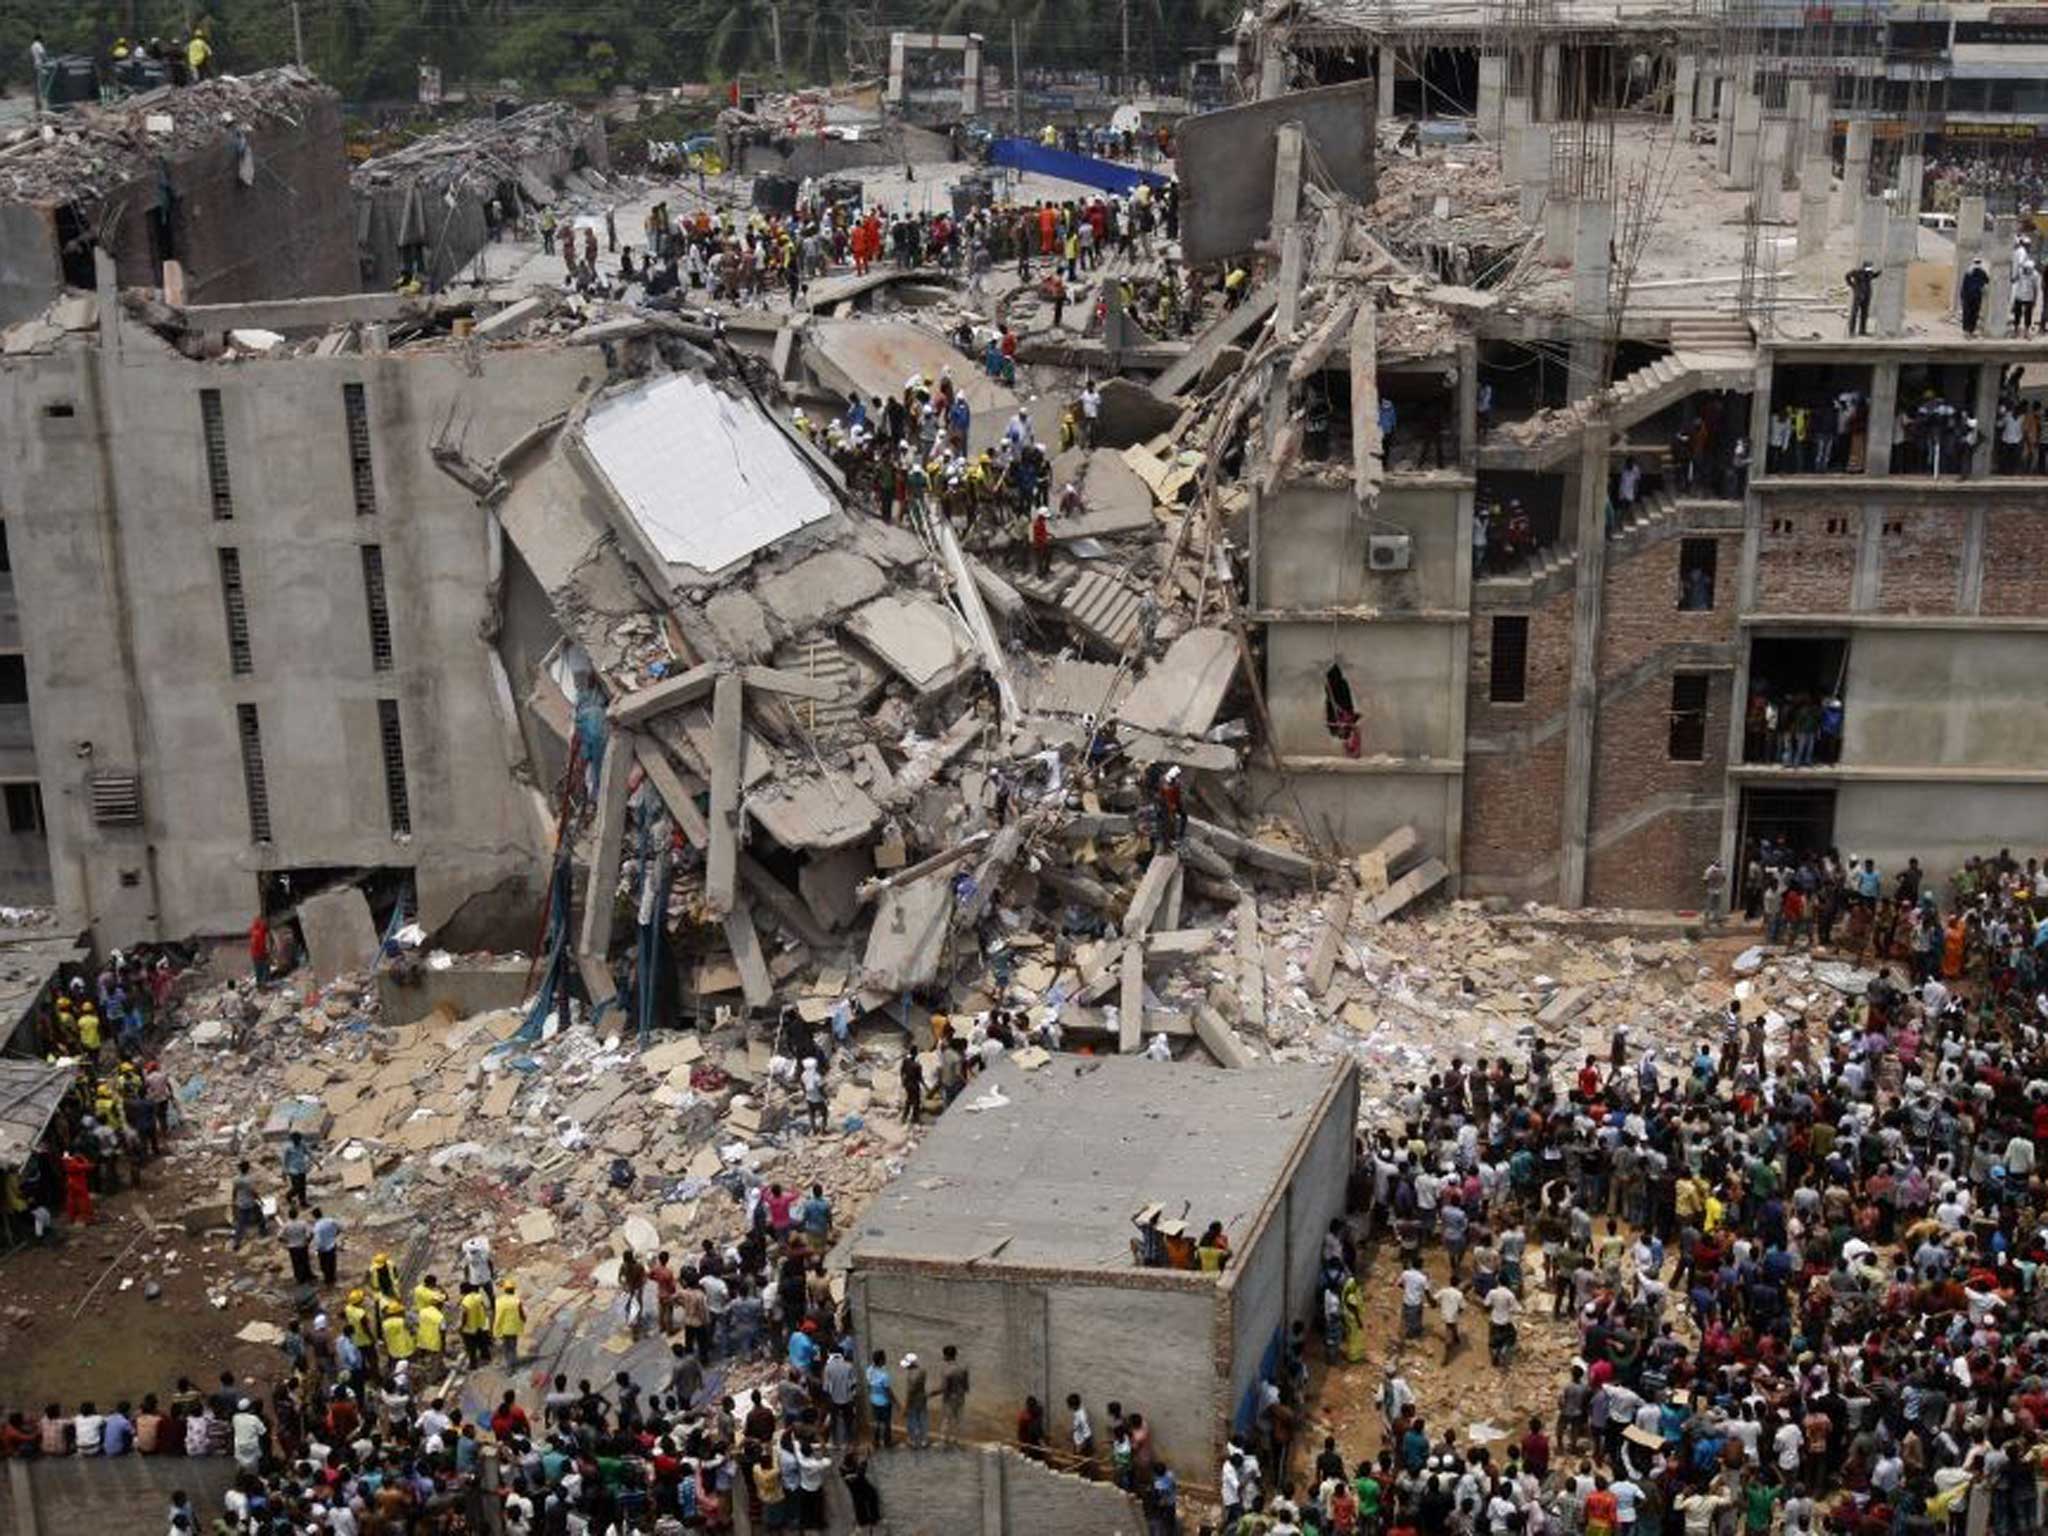 Deadly job: More than 1,000 garment workers were killed in the Rana Plaza factory collapse